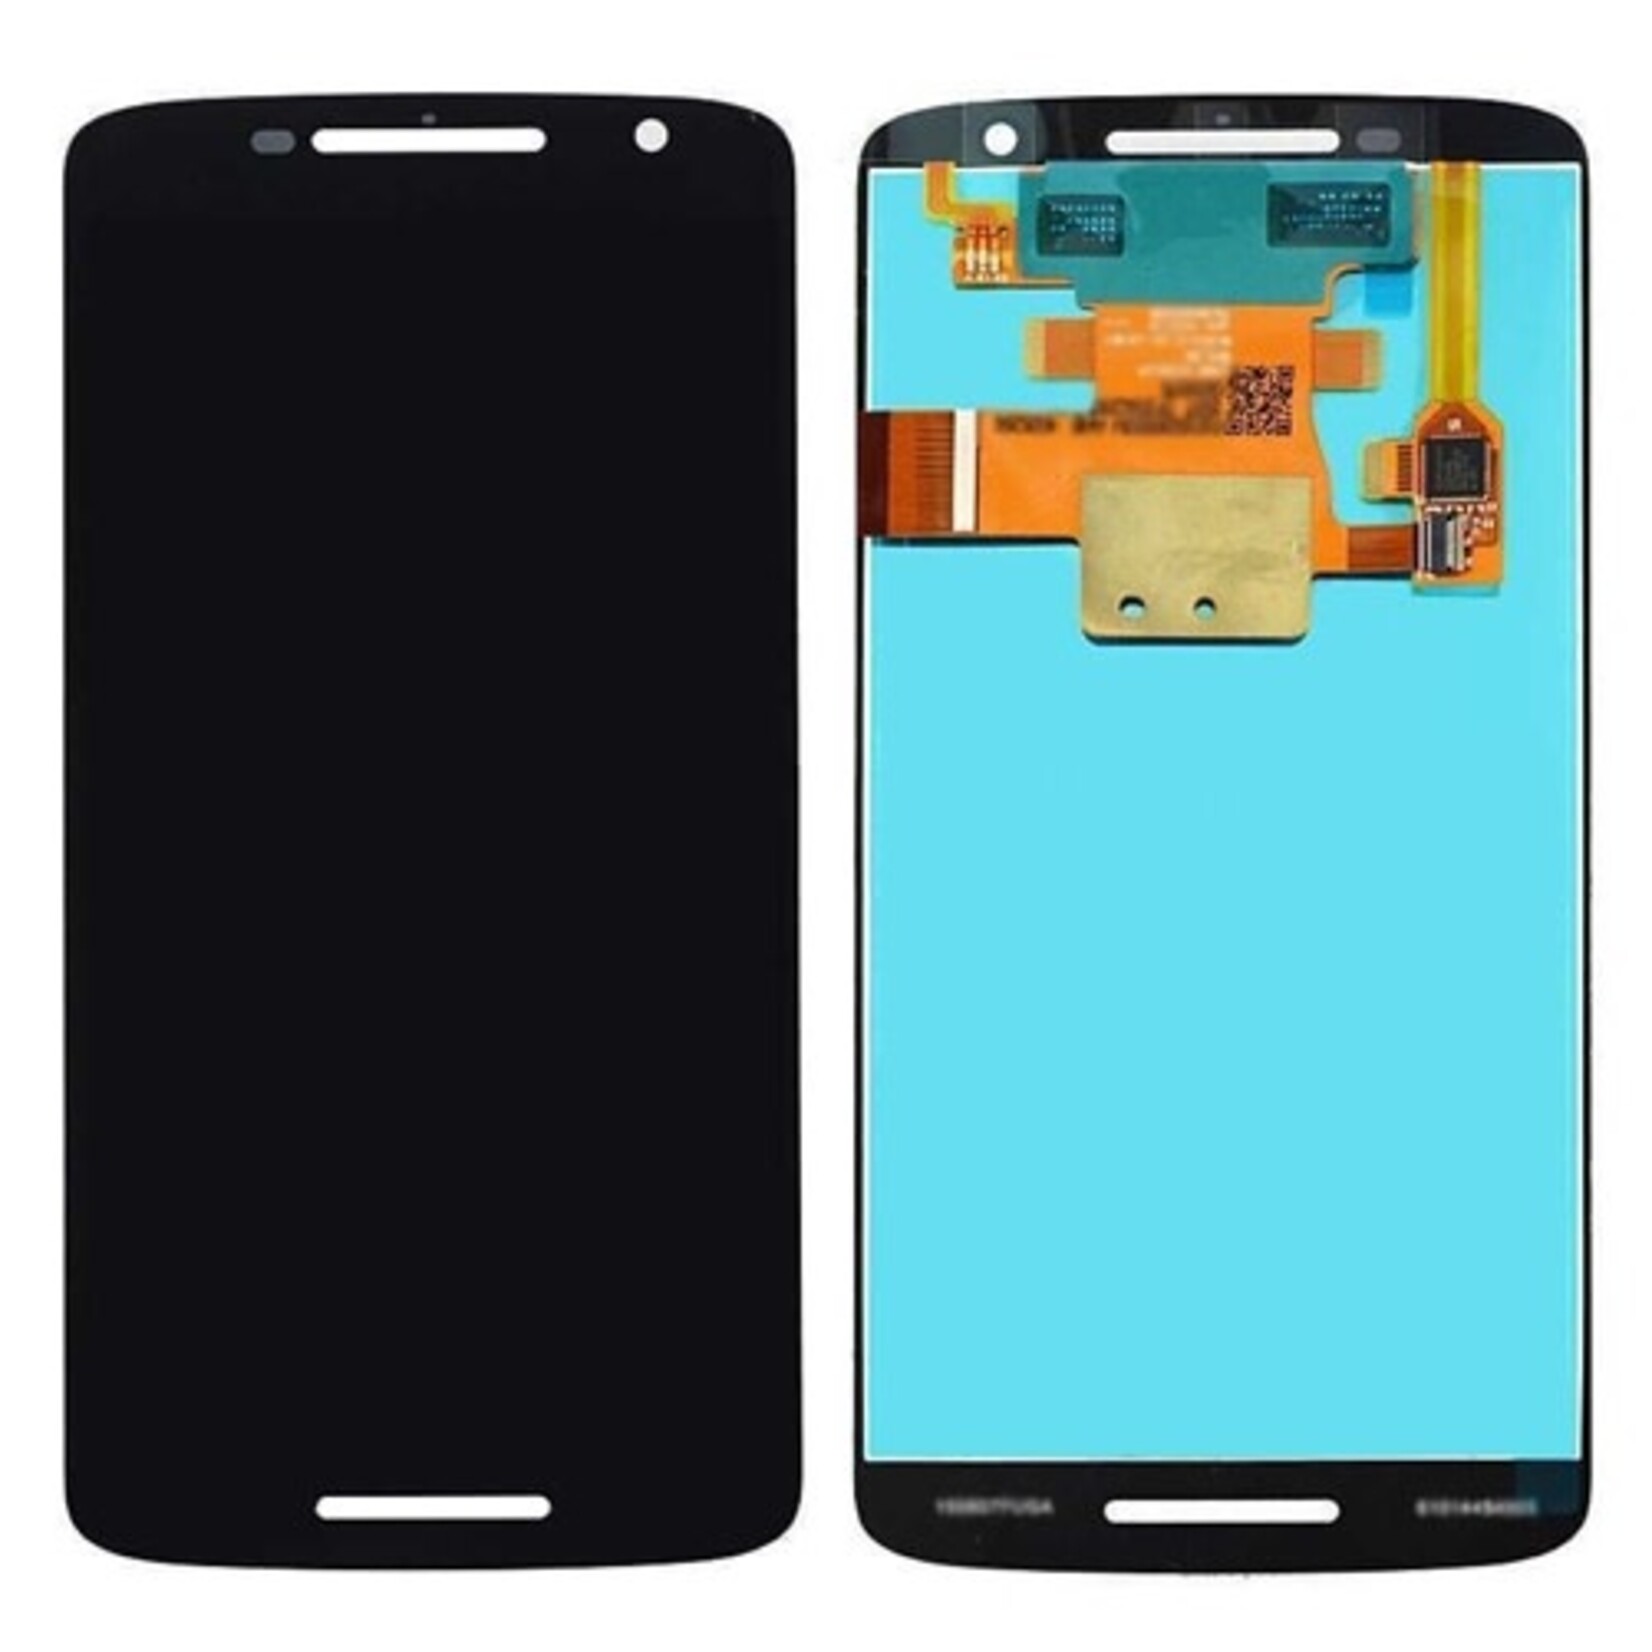 Motorola LCD DIGITIZER ASSEMBLY WITH FRAME MOTO X PLAY